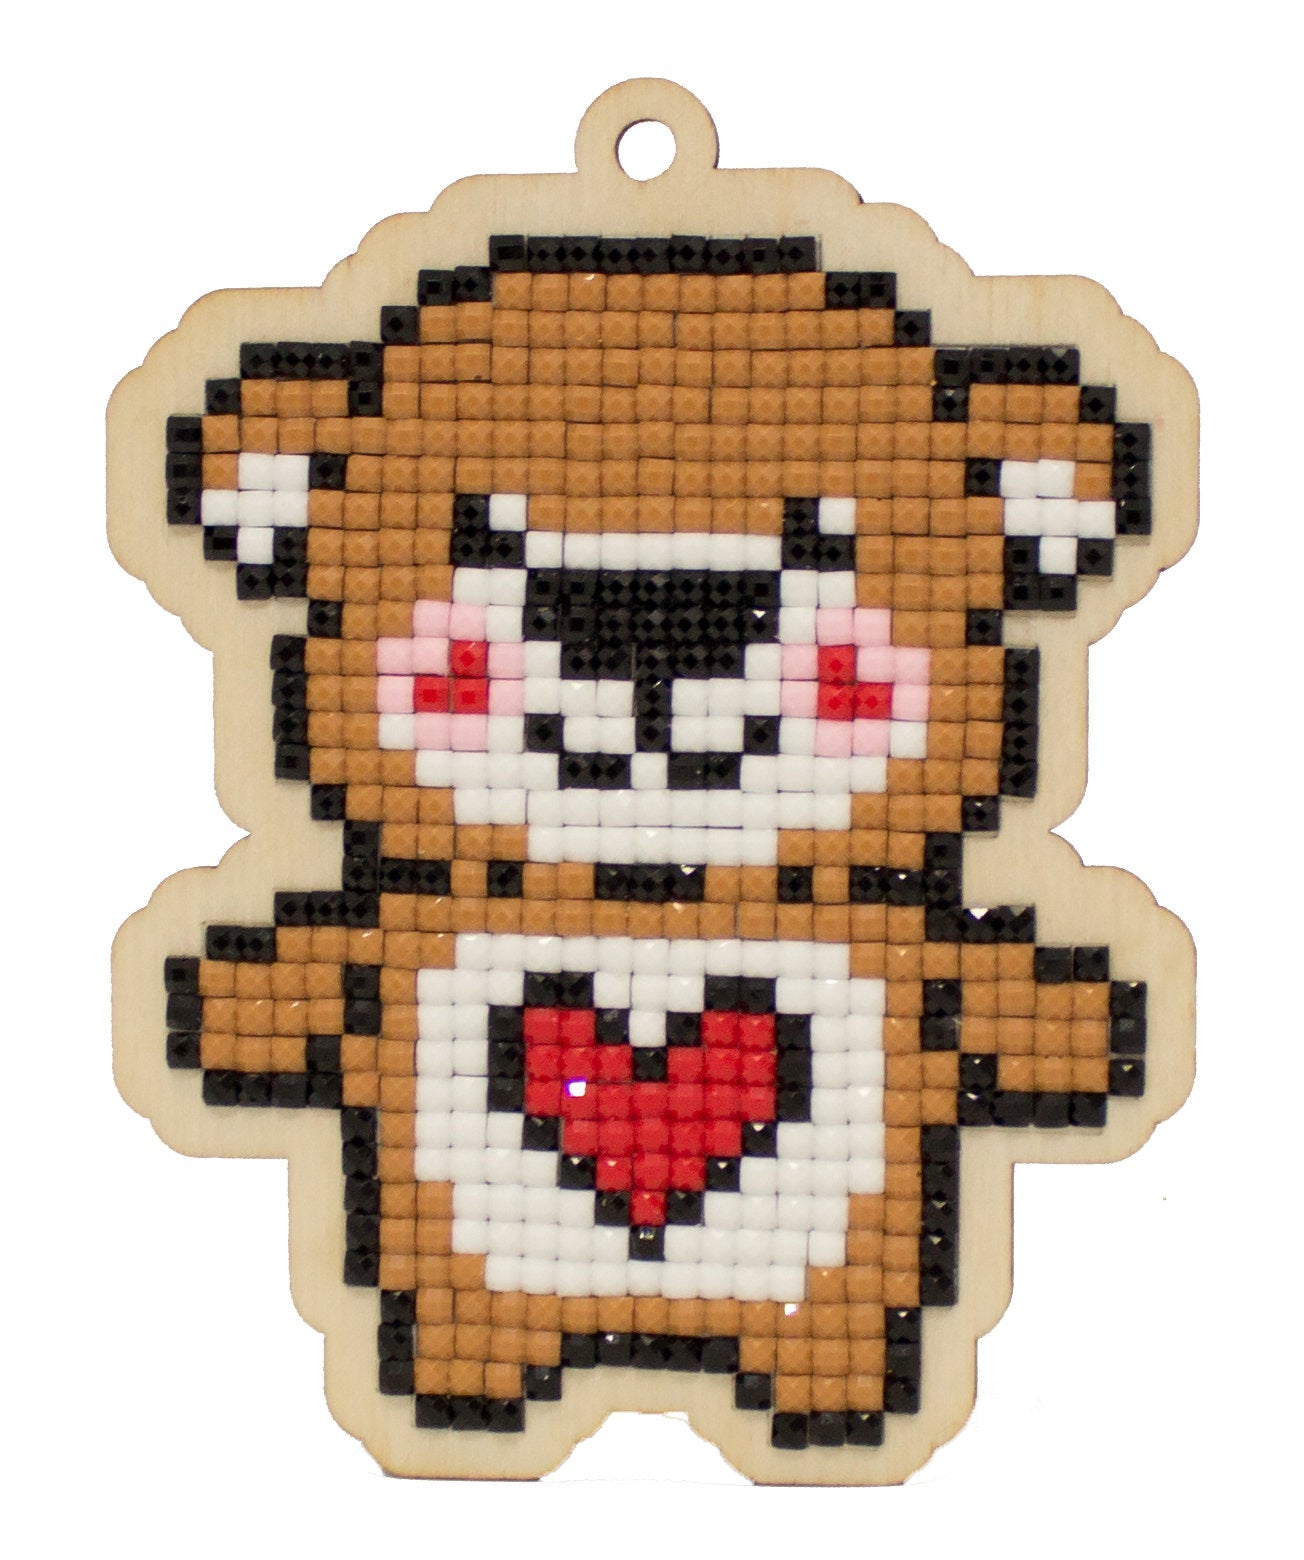 Wizardi Wooden Charms Diamond Painting Kit - Bear with Heart